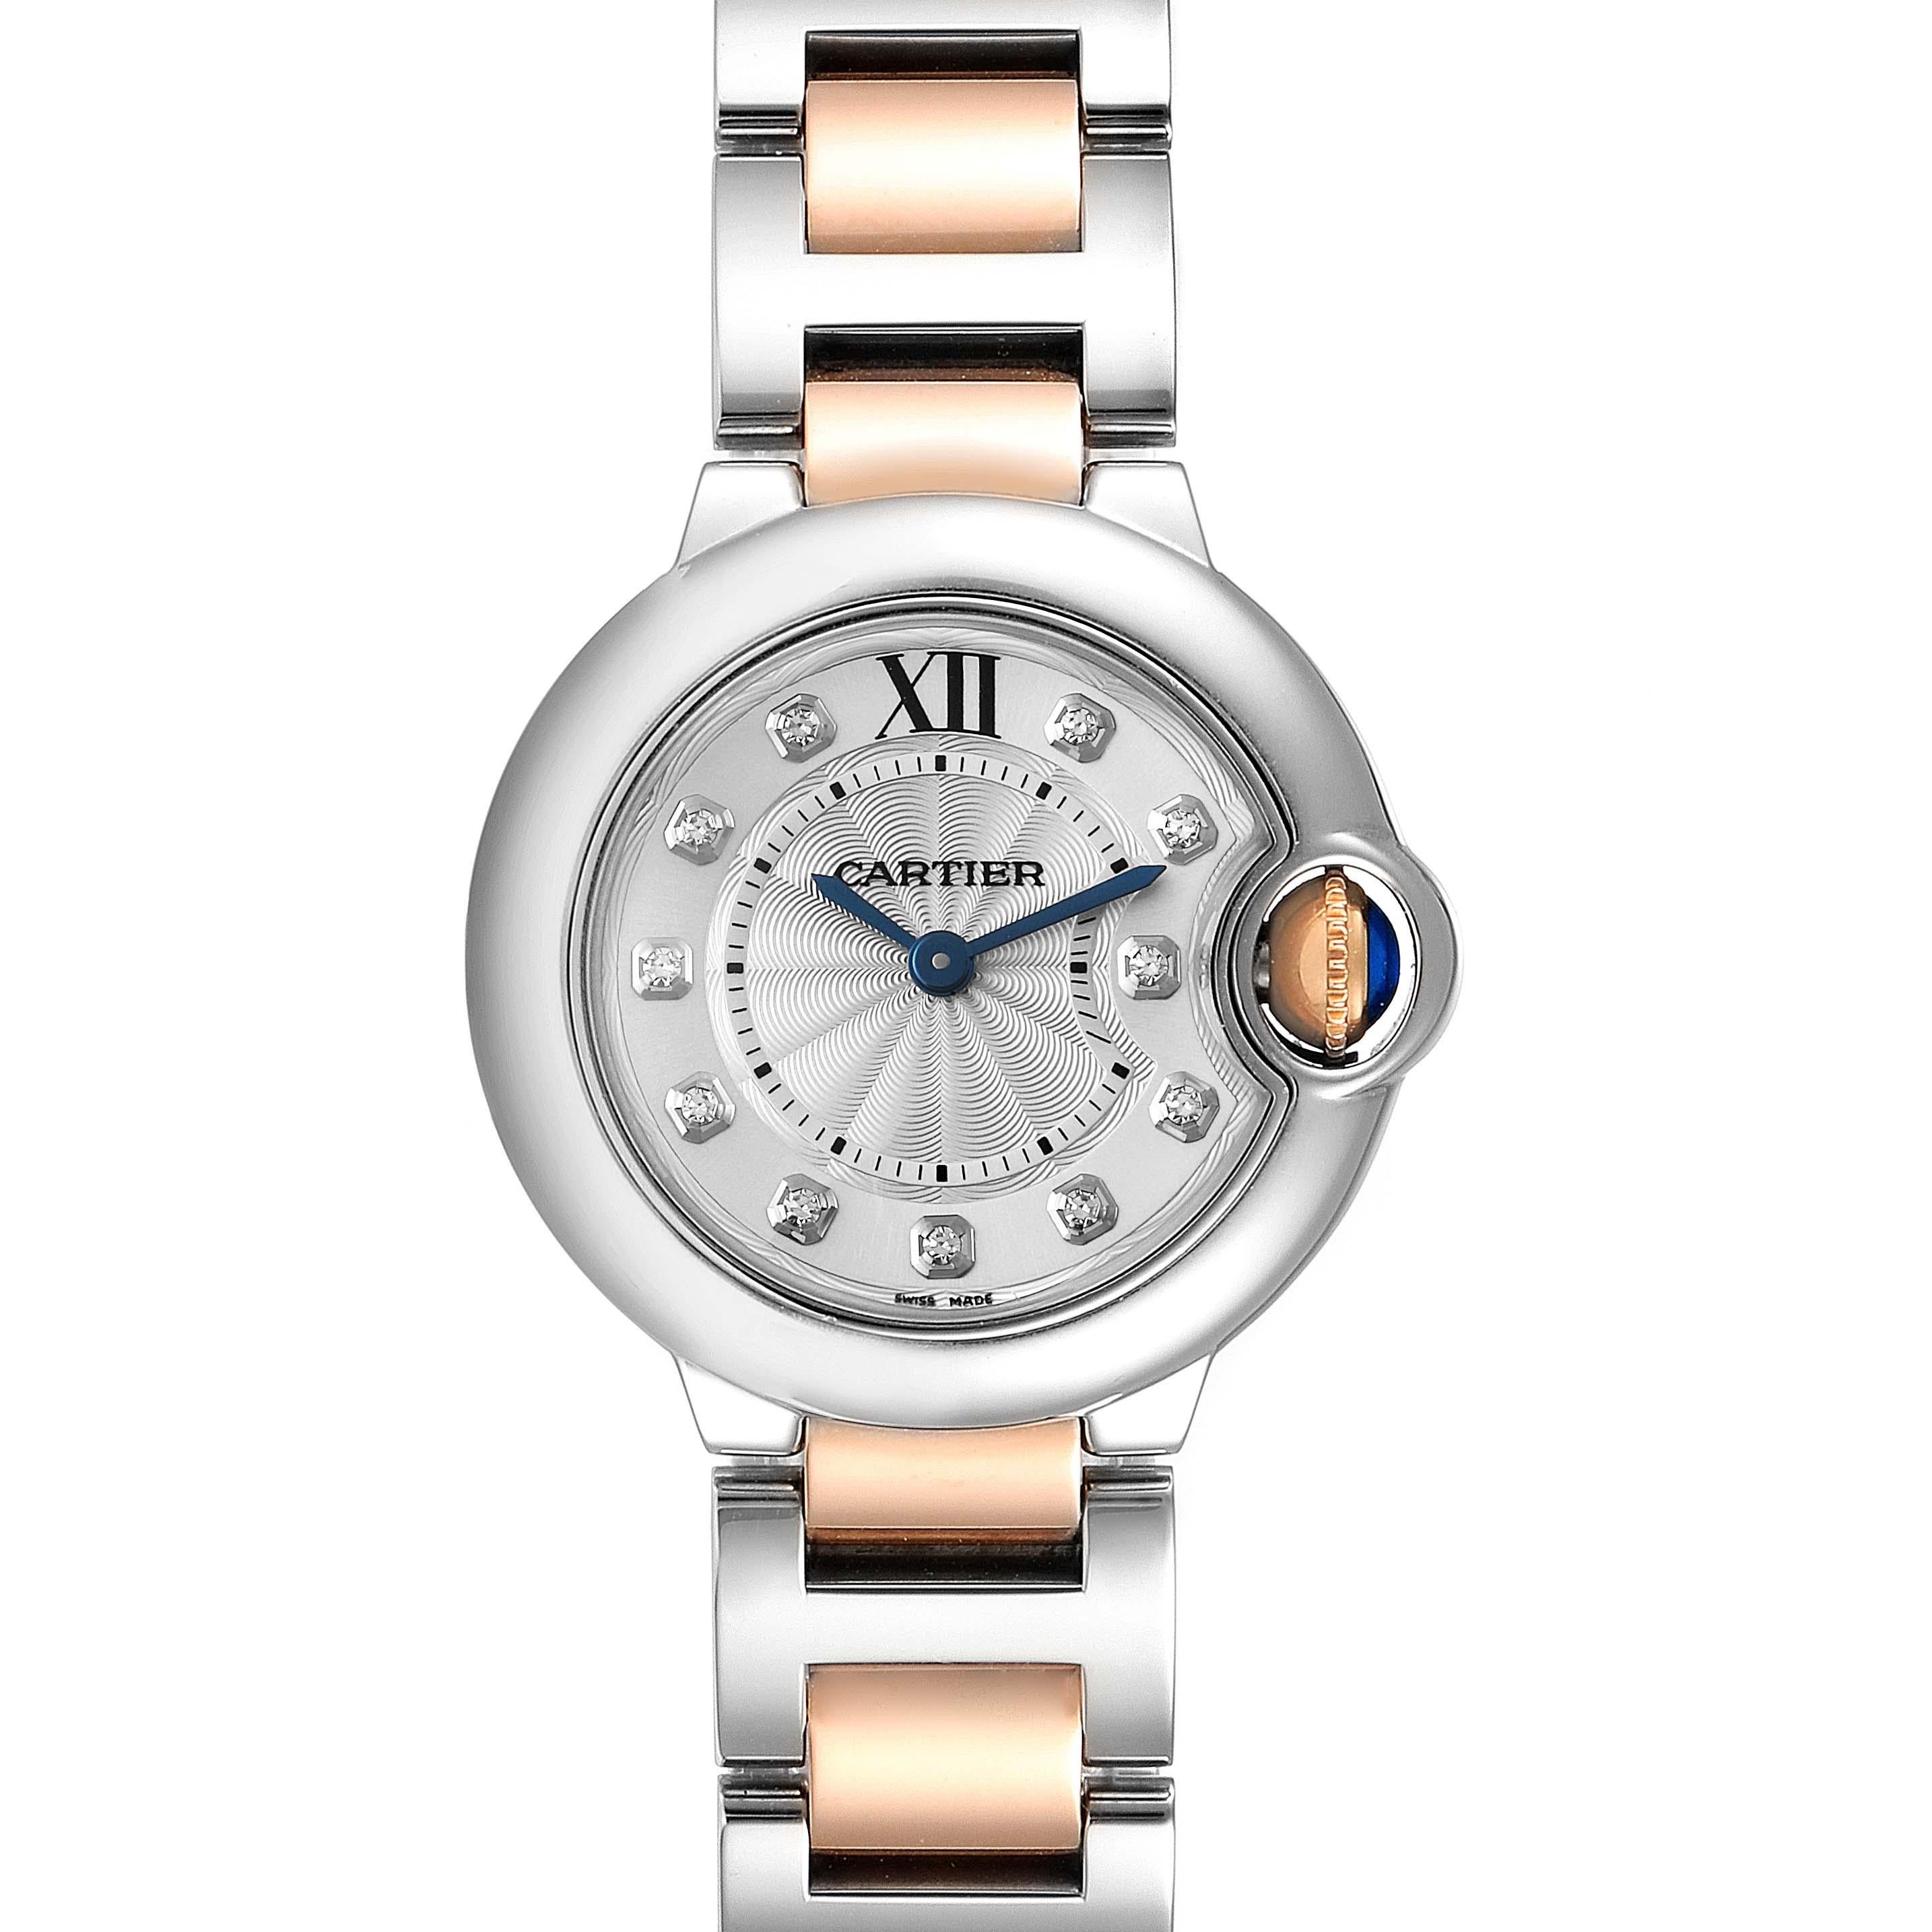 Cartier Ballon Bleu Steel Rose Gold Diamond Ladies Watch WE902030. Quartz movement. Caliber 049. Round stainless steel case 29.0 mm in diameter. 18k rose gold fluted crown set with the blue spinel cabochon. Stainless steel smooth bezel. Scratch